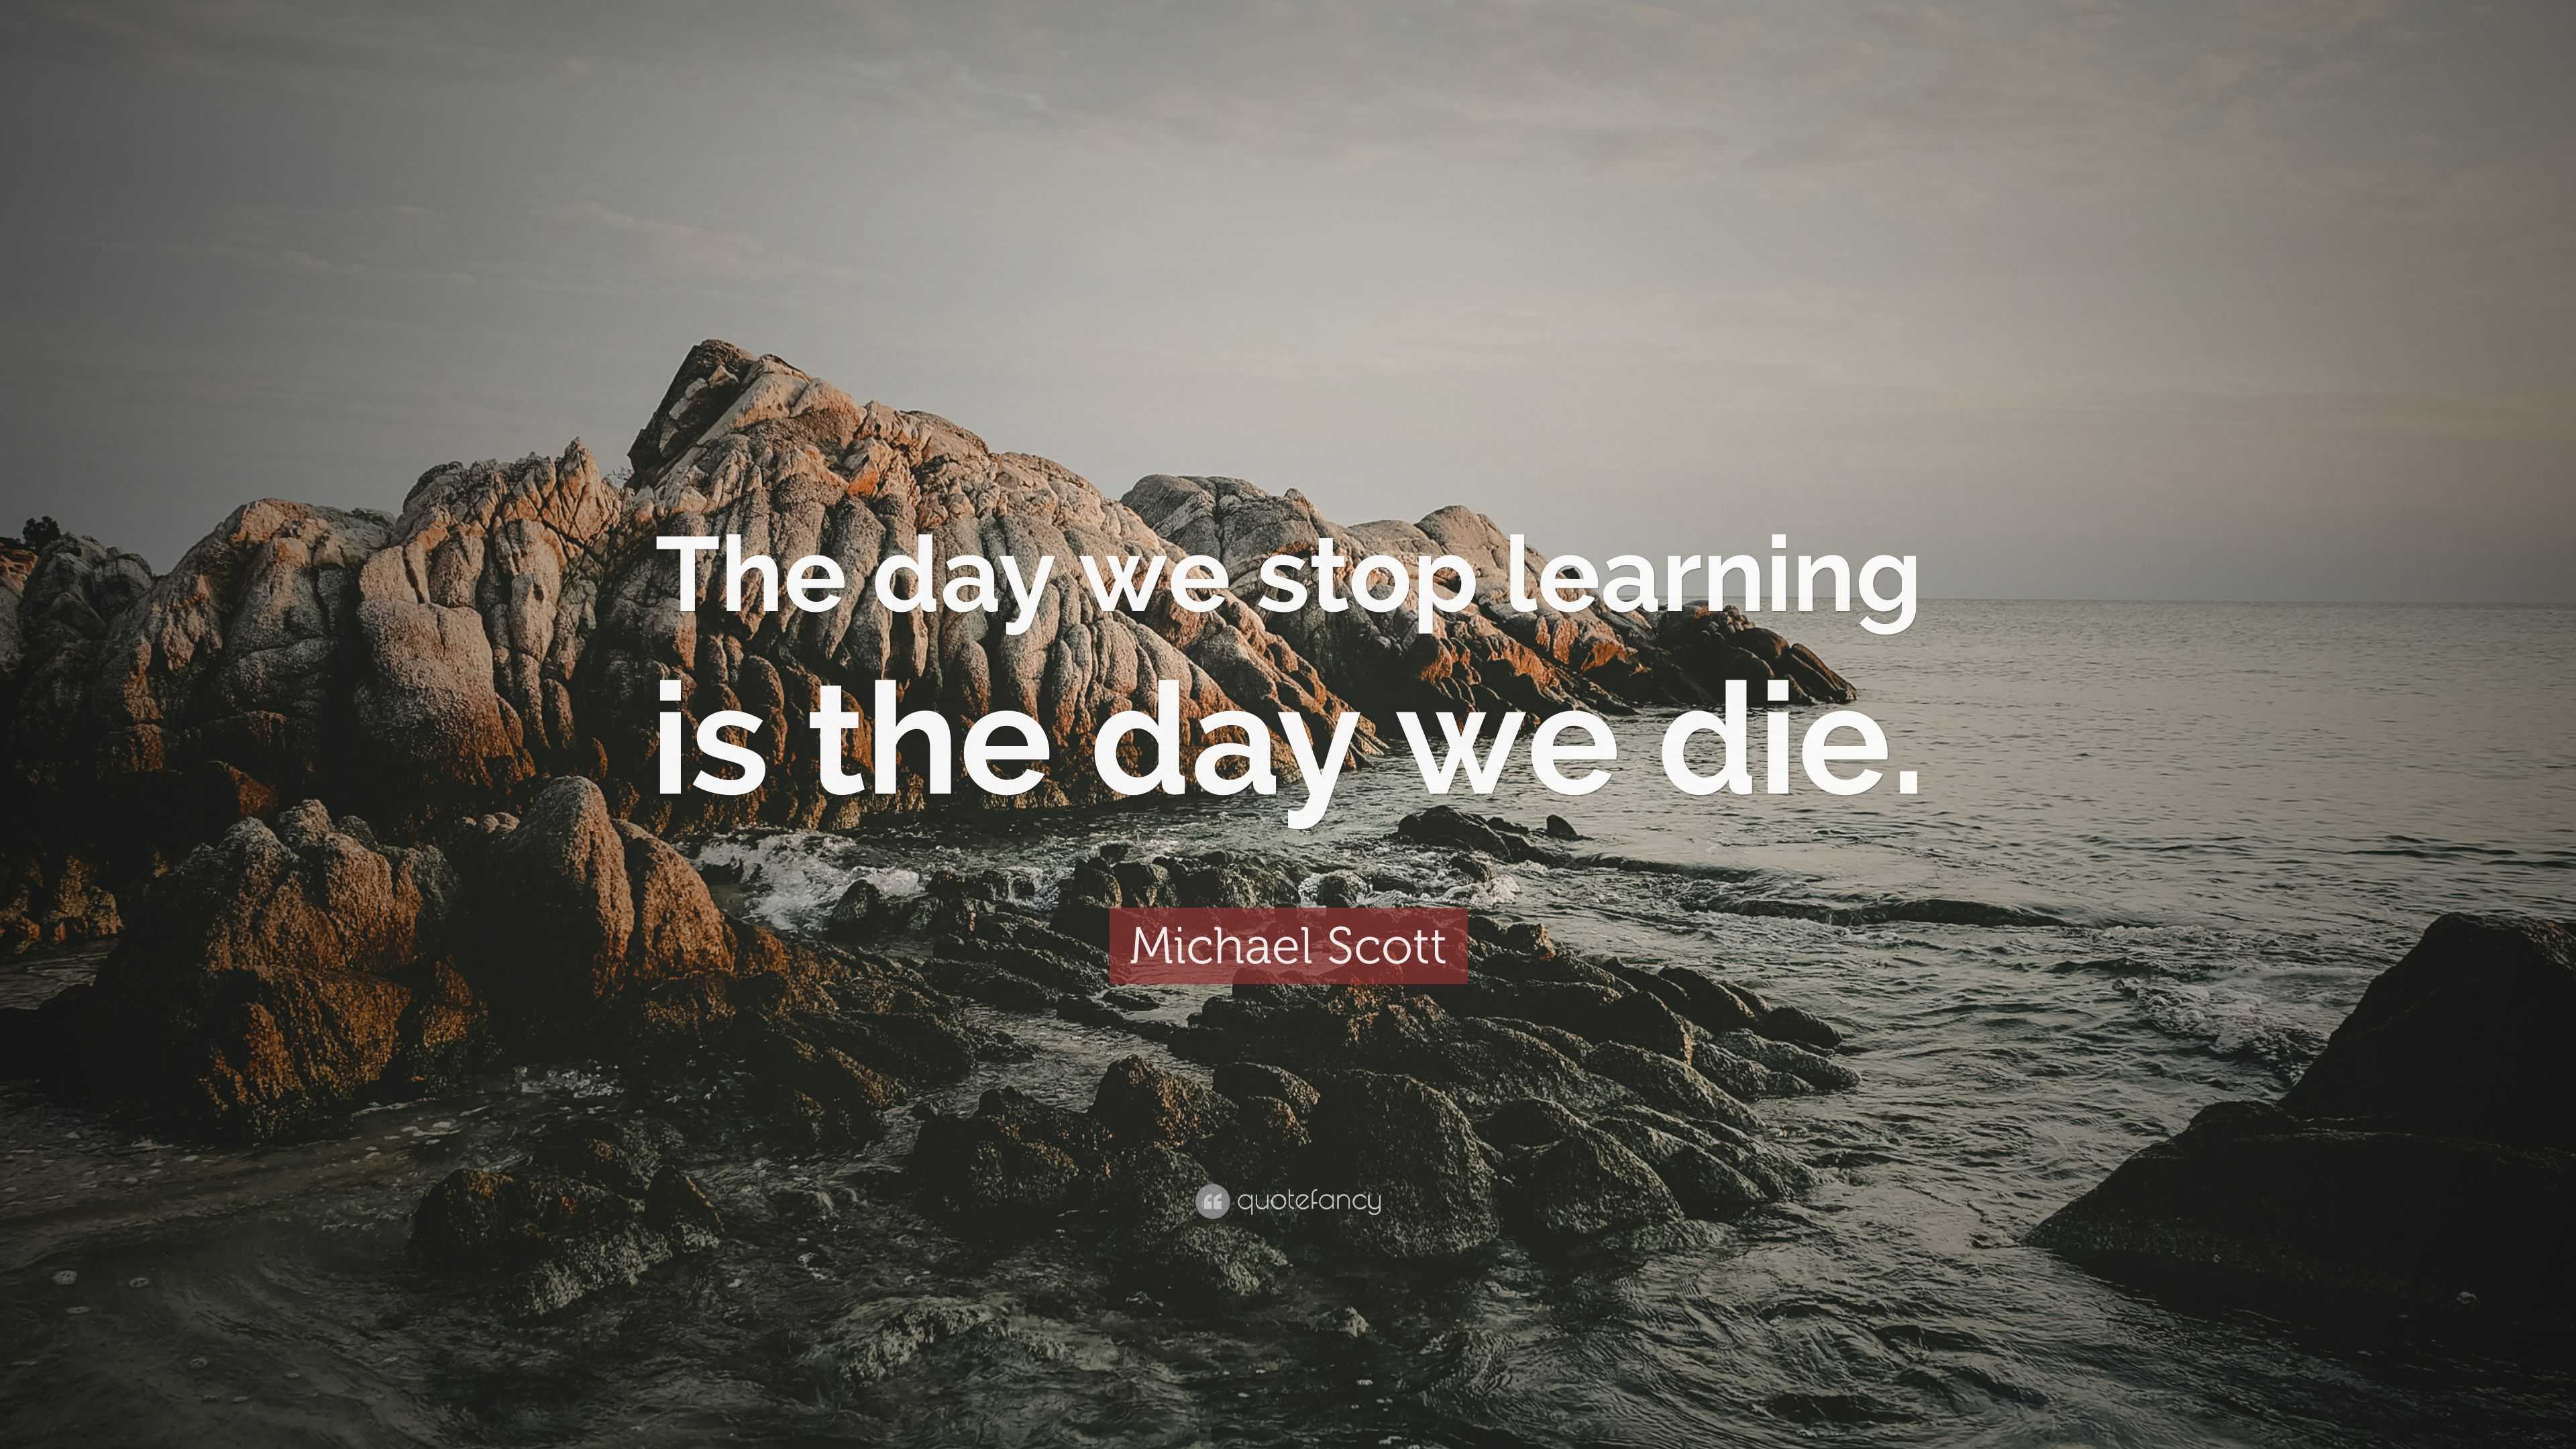 Michael Scott Quote: “The day we stop learning is the day we die.” (17